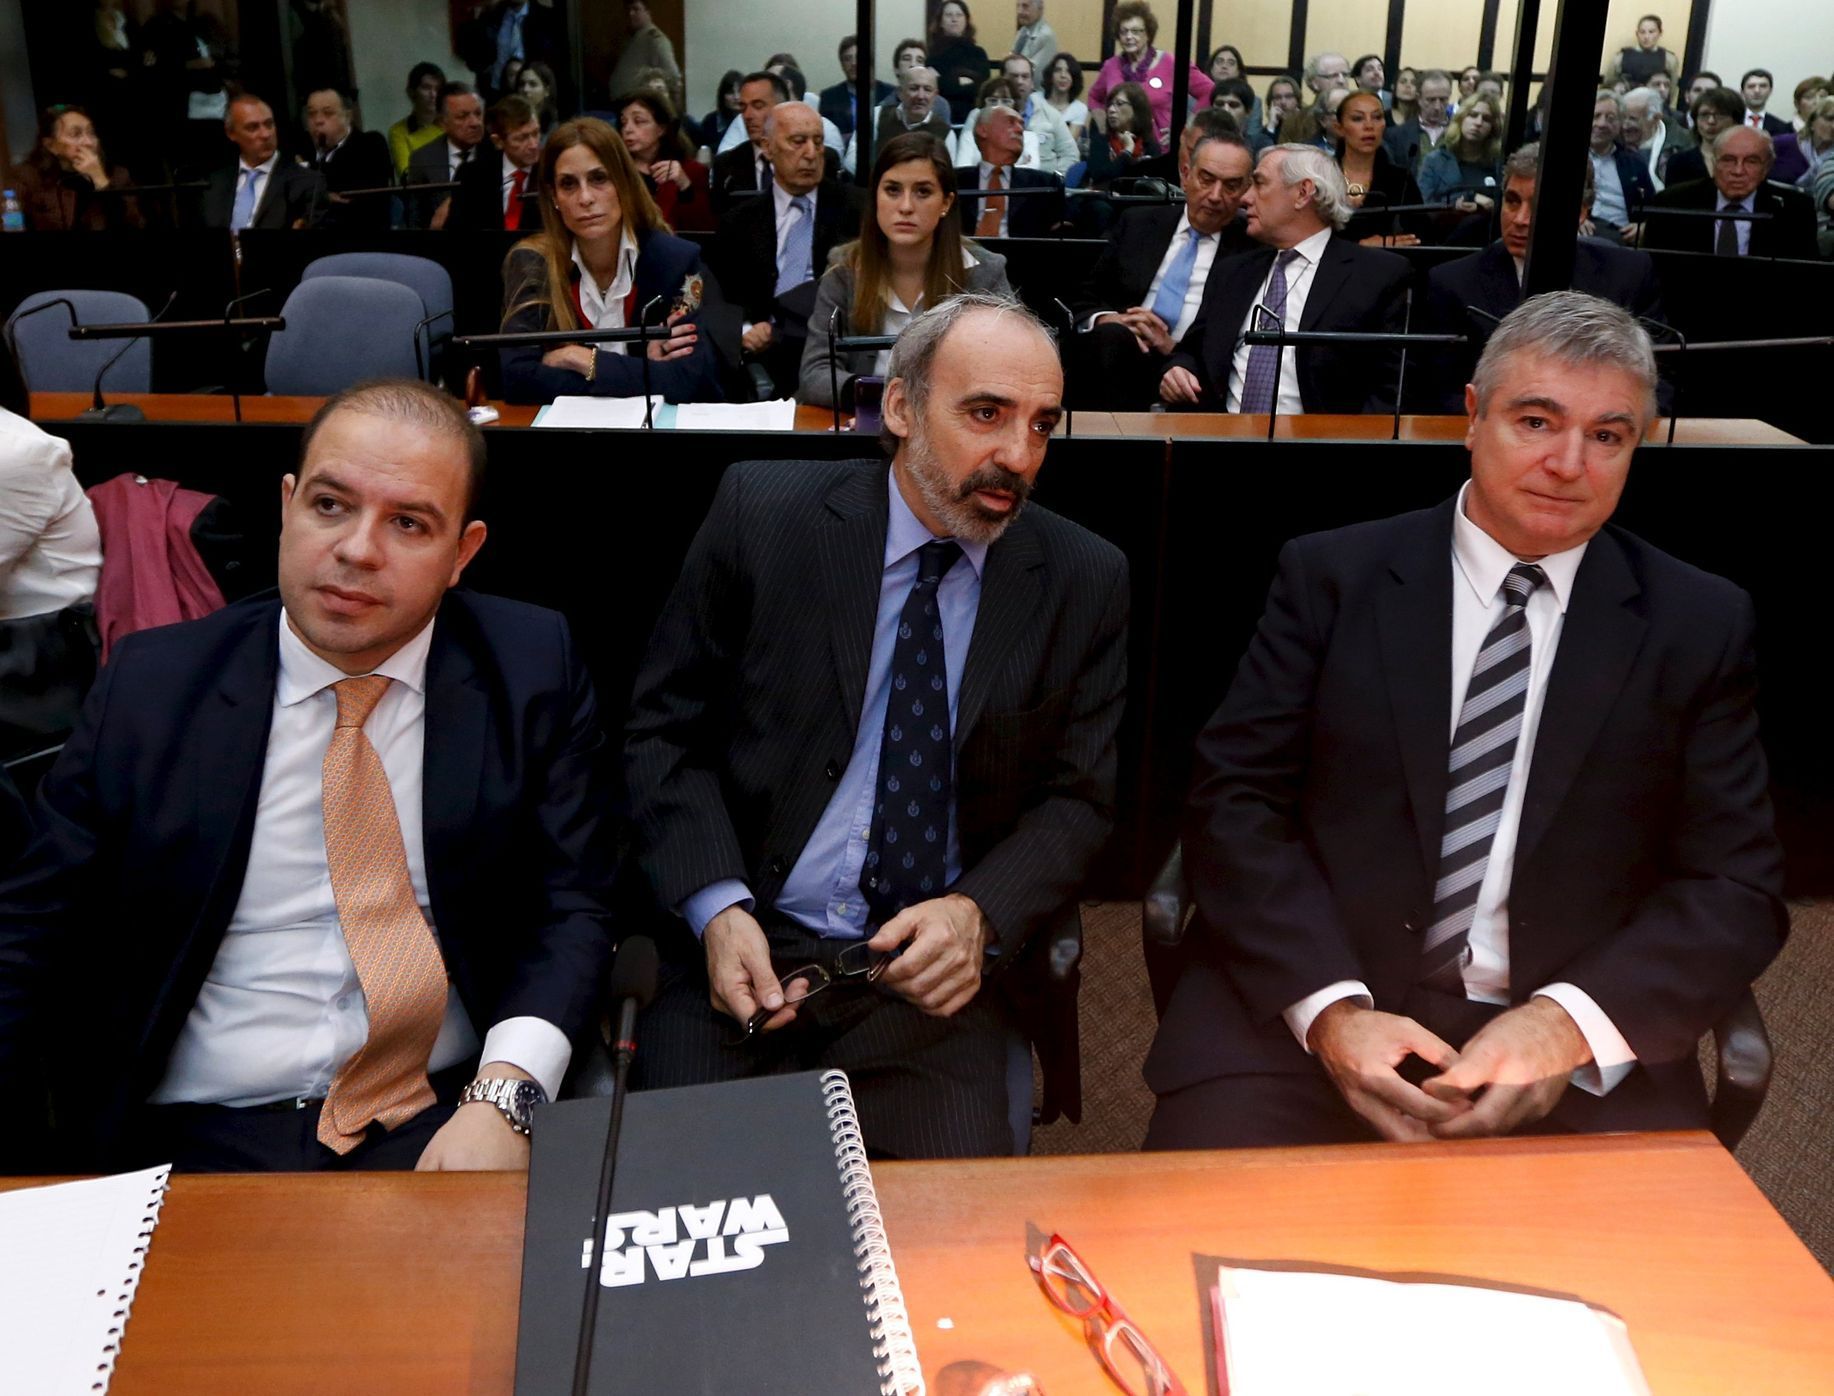 Former Argentine federal judge Galeano sits in court flanked by two unidentified attornies in Buenos Aires